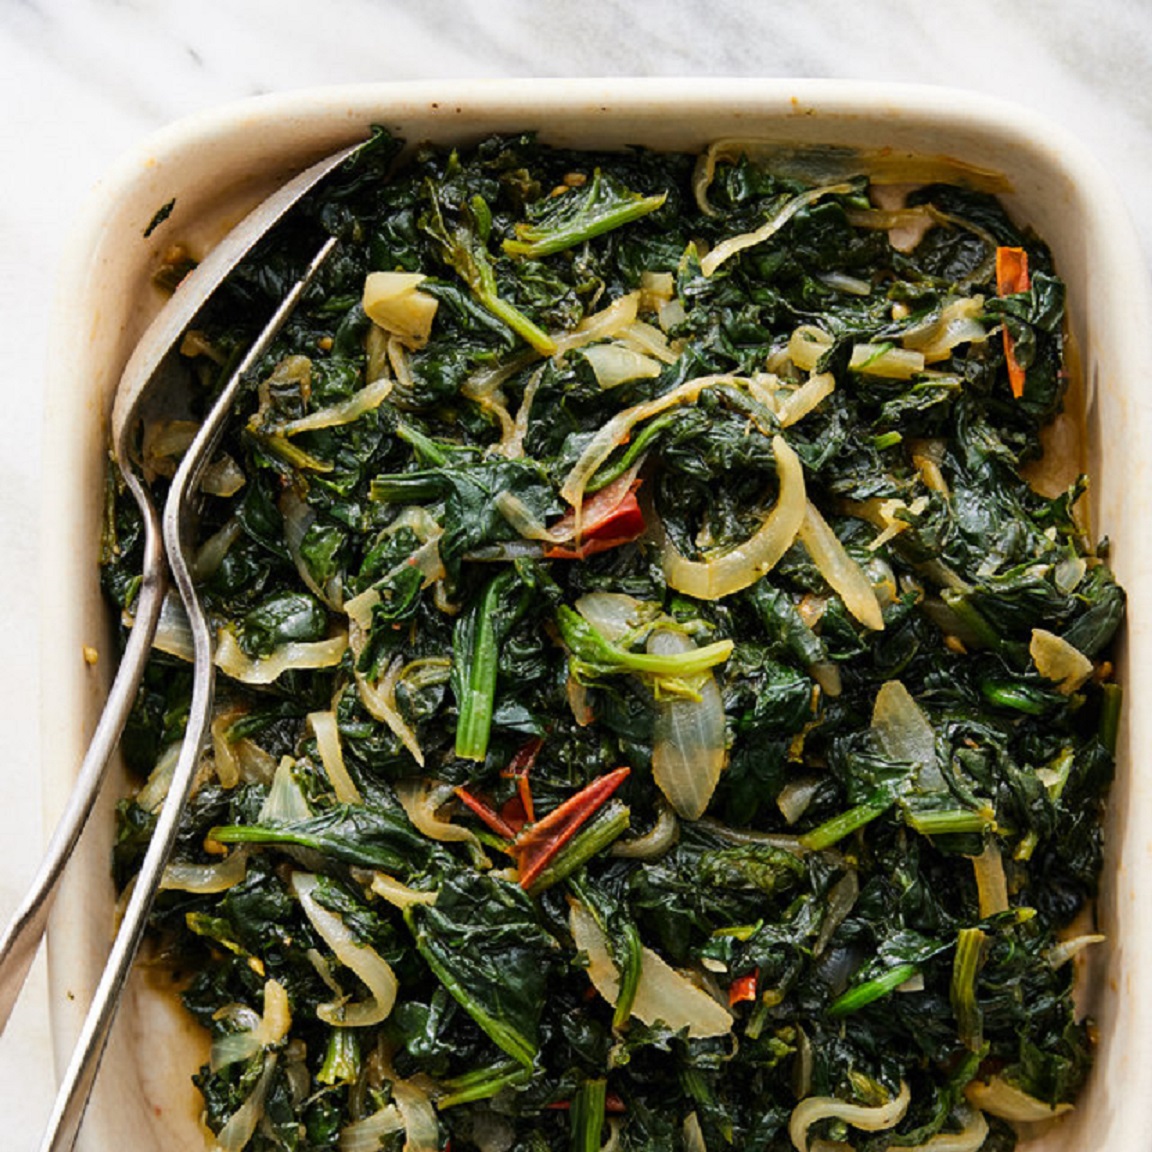 <p> Callaloo is a leafy green vegetable dish often compared to spinach. It’s typically cooked with onions, garlic, tomatoes, and Scotch bonnet peppers for a bit of heat. Sometimes, it's mixed with saltfish, or other meats for added flavor. This nutritious dish is commonly served as a side with breakfast or dinner and is a staple in many Jamaican households. </p> :: NYT